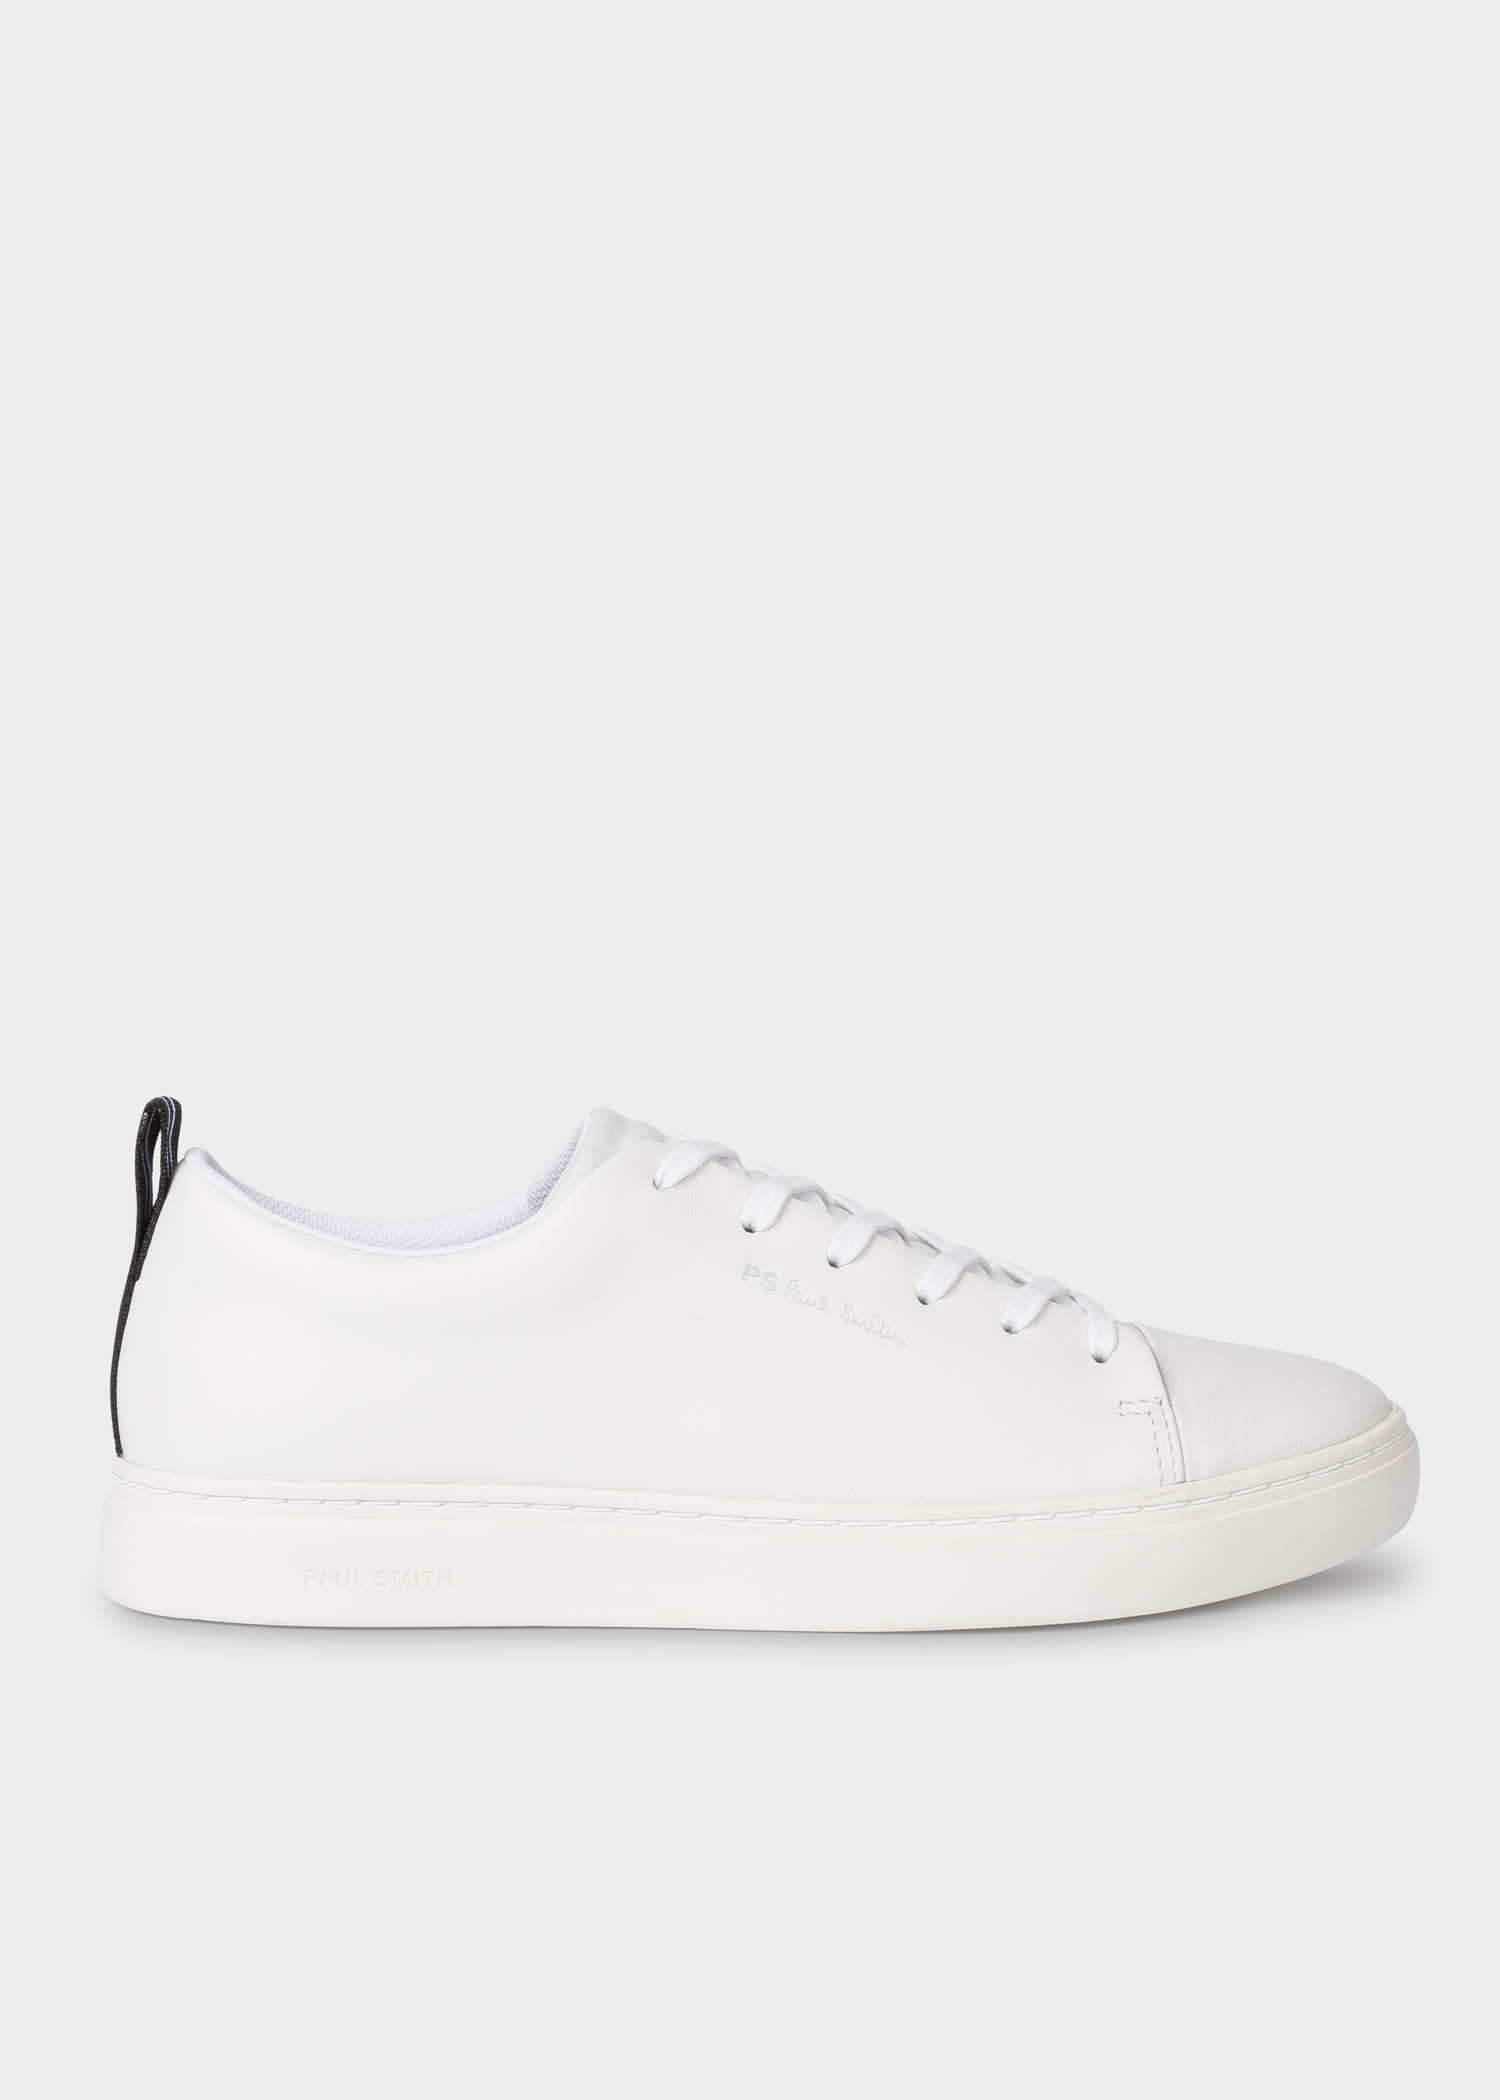 Men's White Leather Sneakers - Paul Smith US